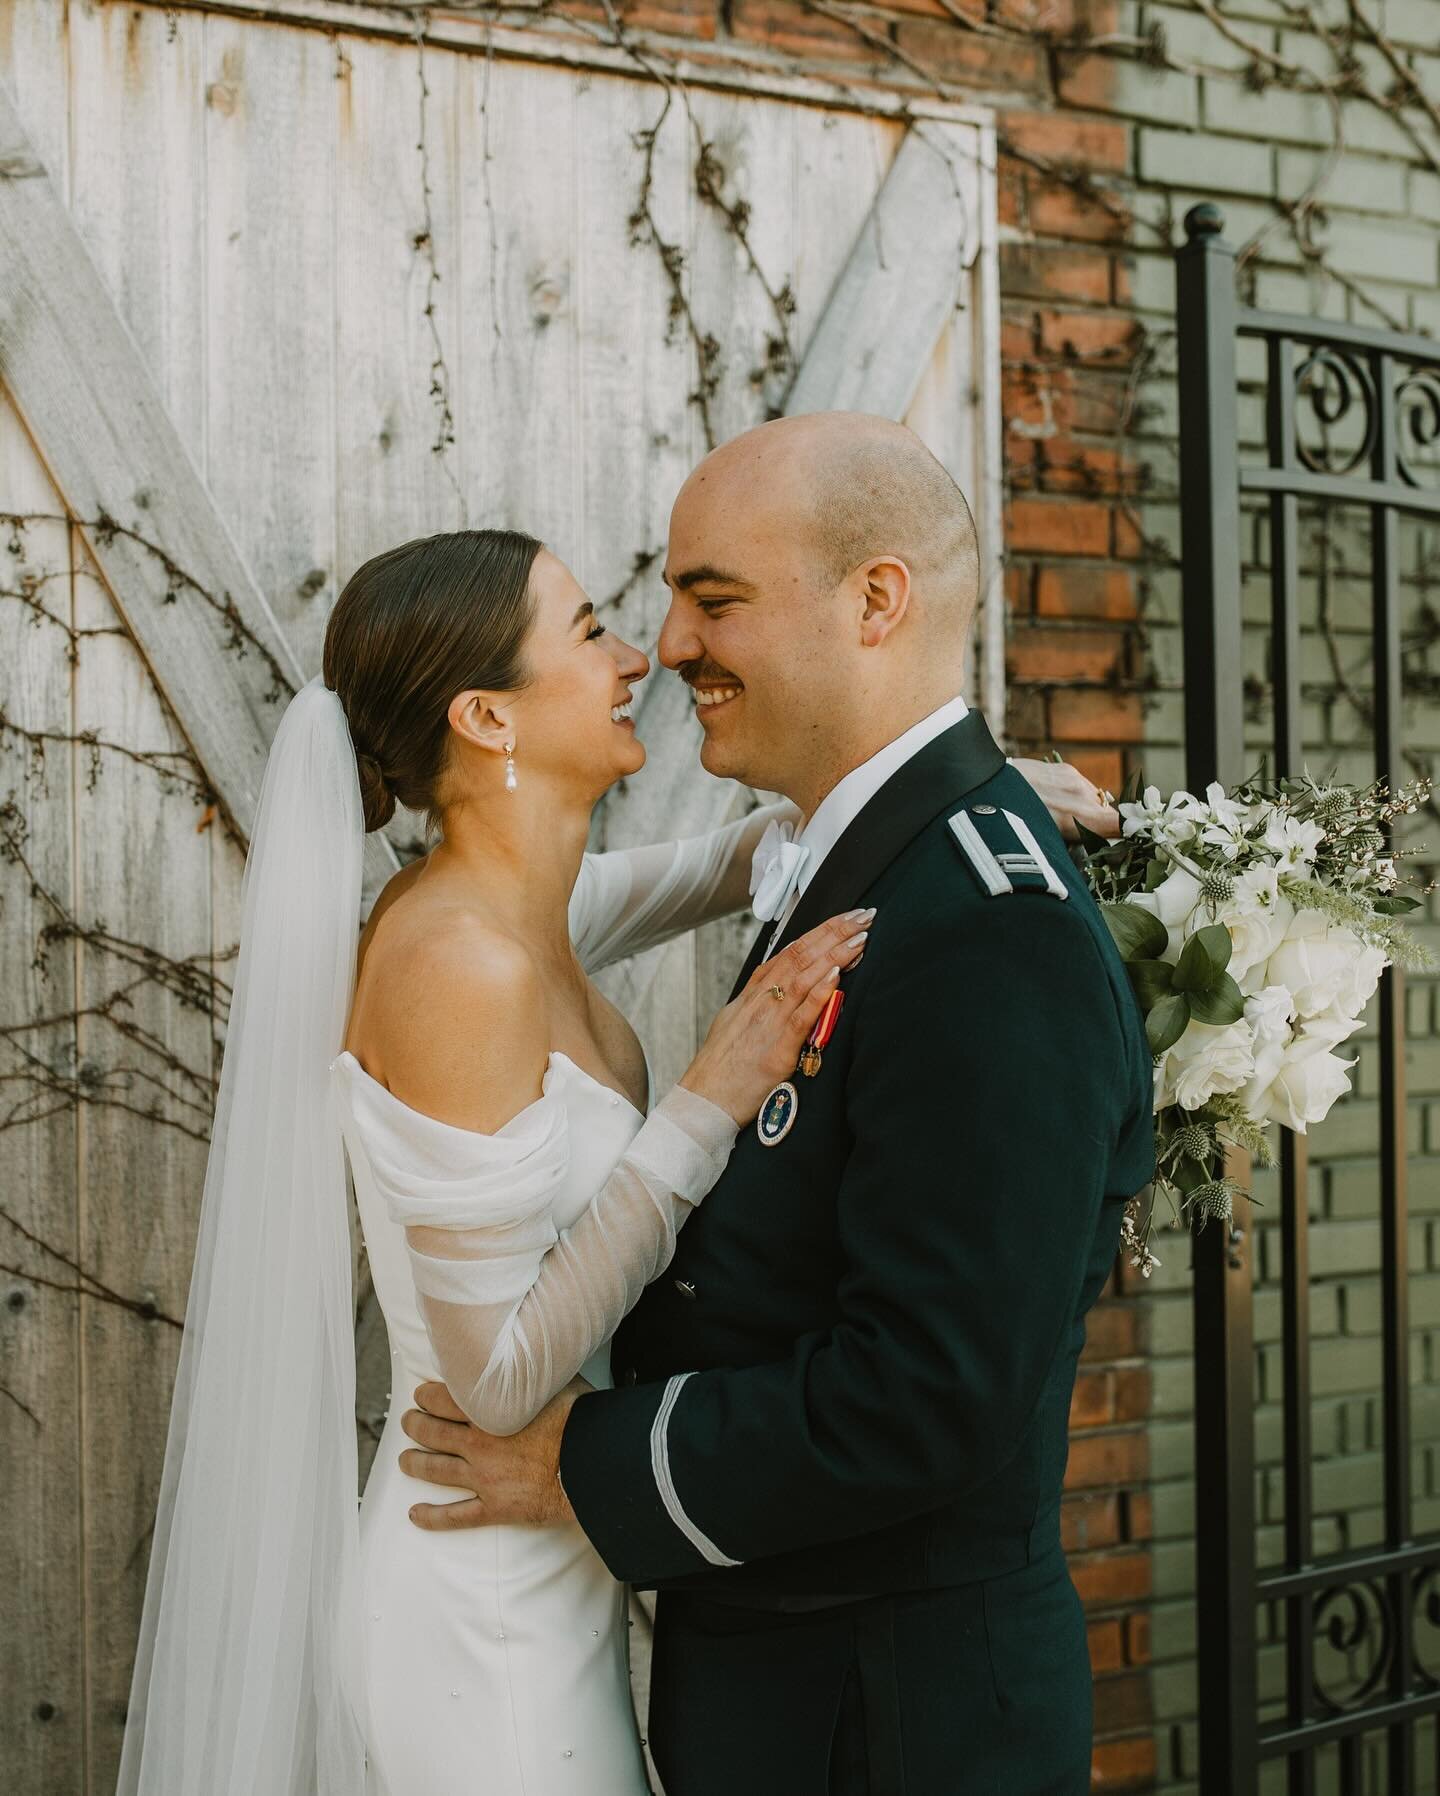 Kori &amp; Cody&rsquo;s @theivyhousemke wedding on Saturday was literally SO much fun! We loved their incredible connection and their fun elements they brought to their wedding day! ❤️